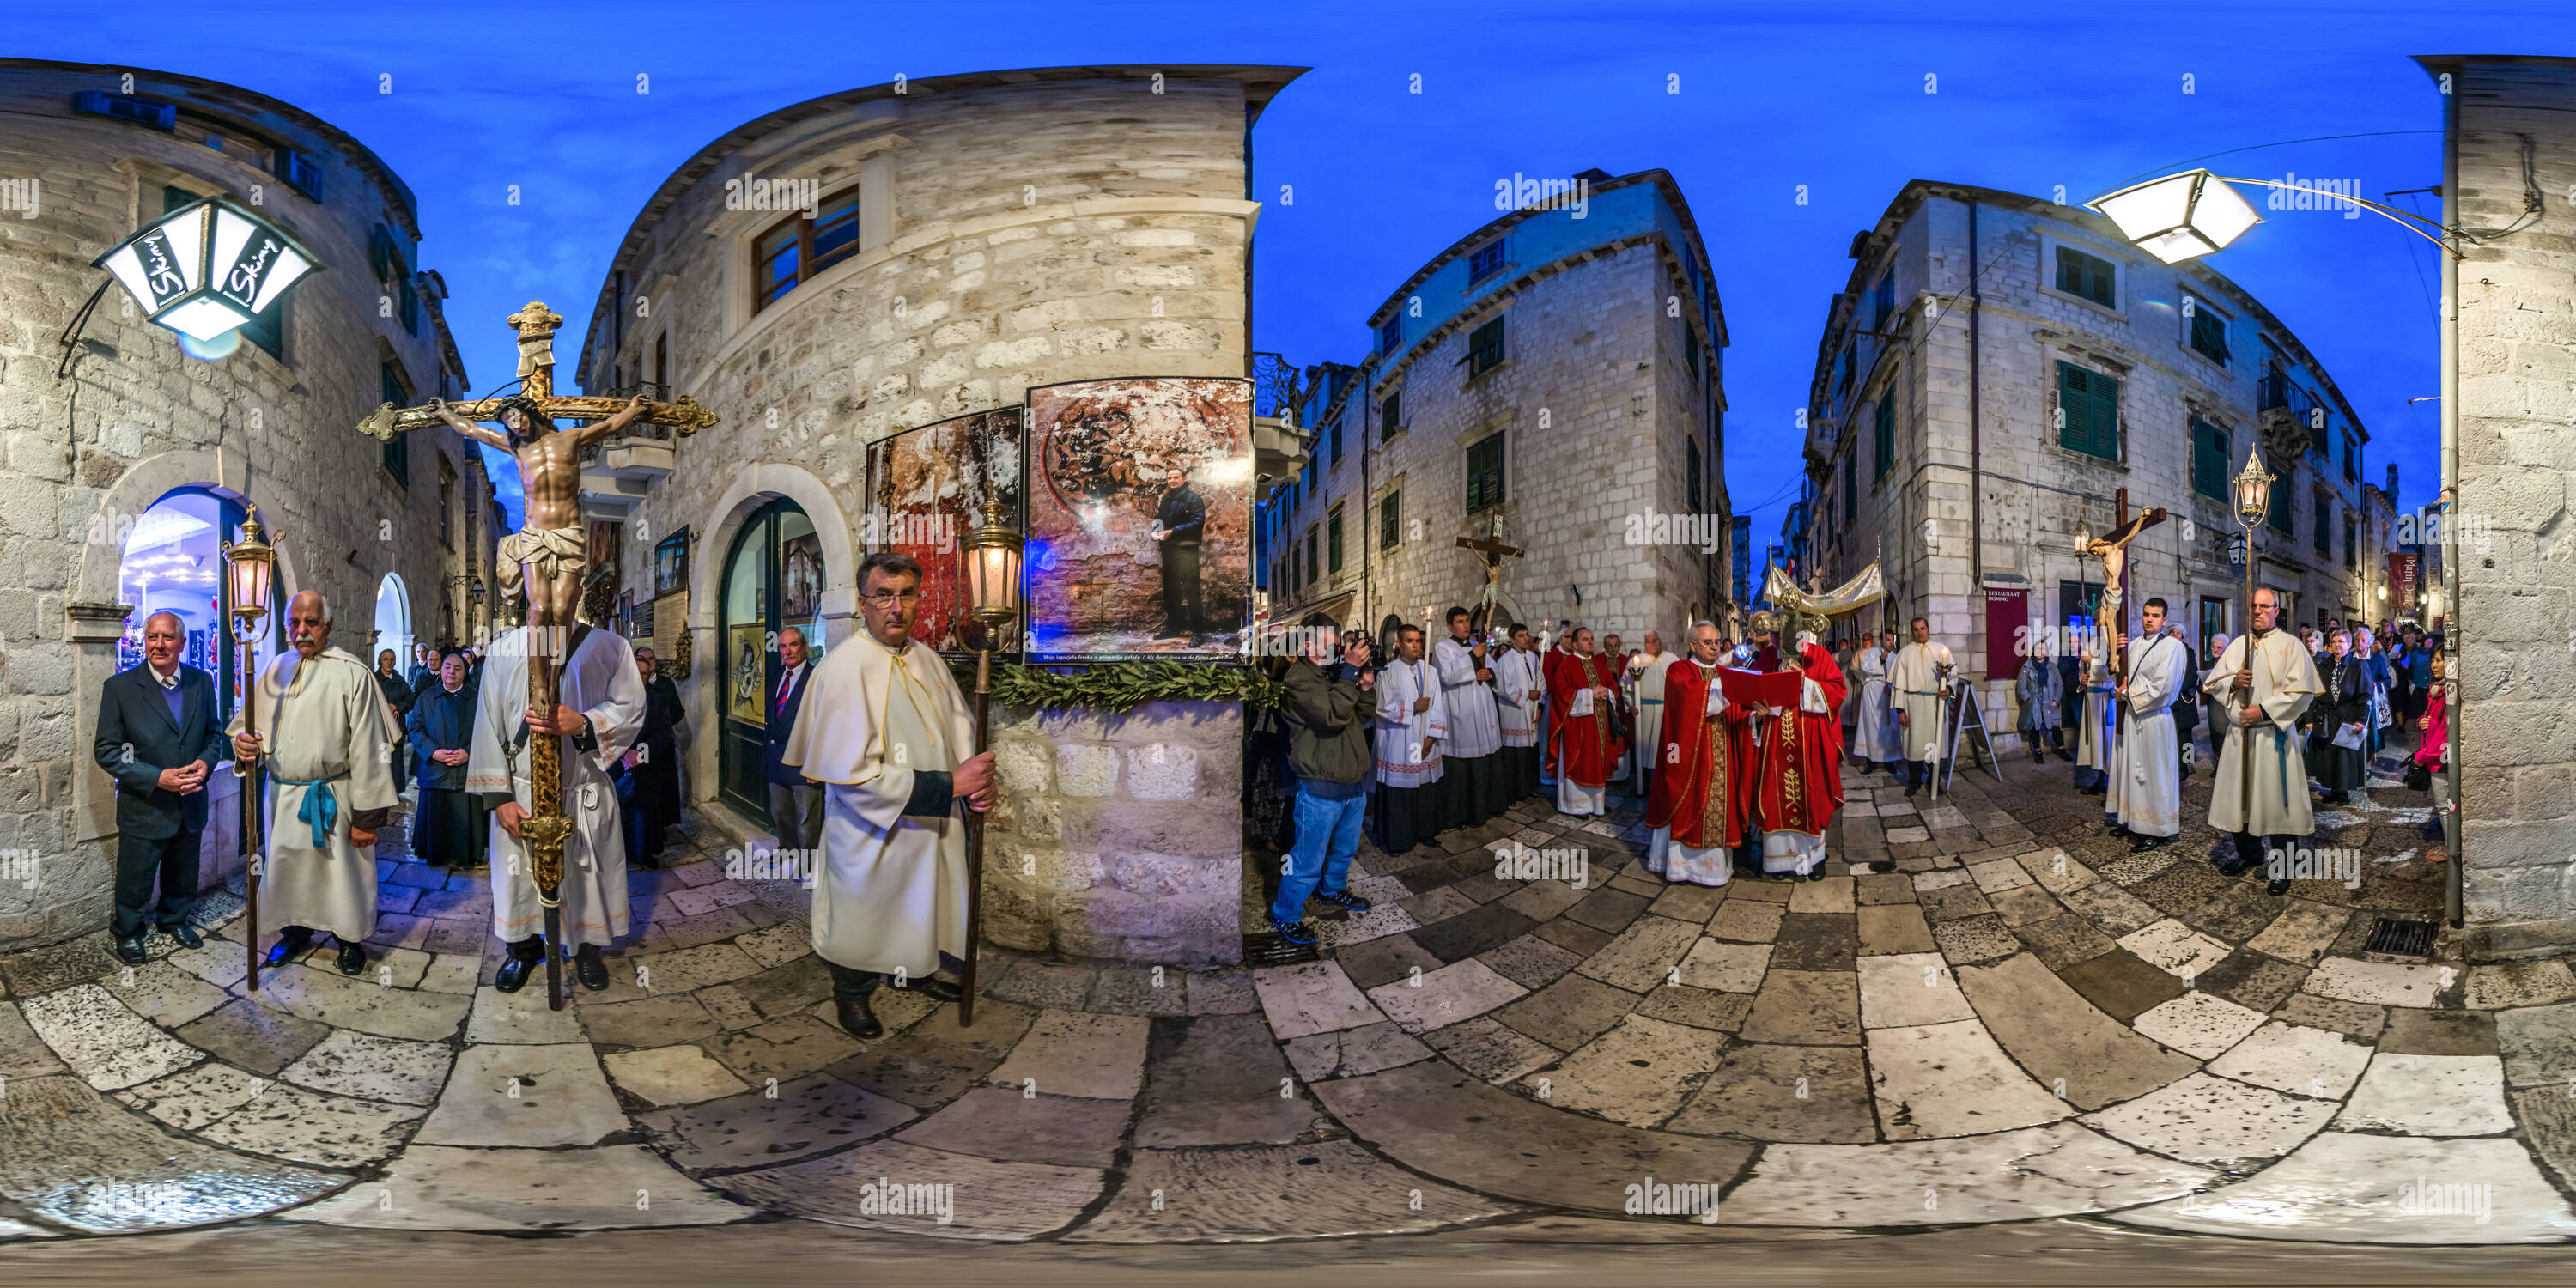 360 degree panoramic view of Procession along Dubrovnik streets on Good Friday 2014.